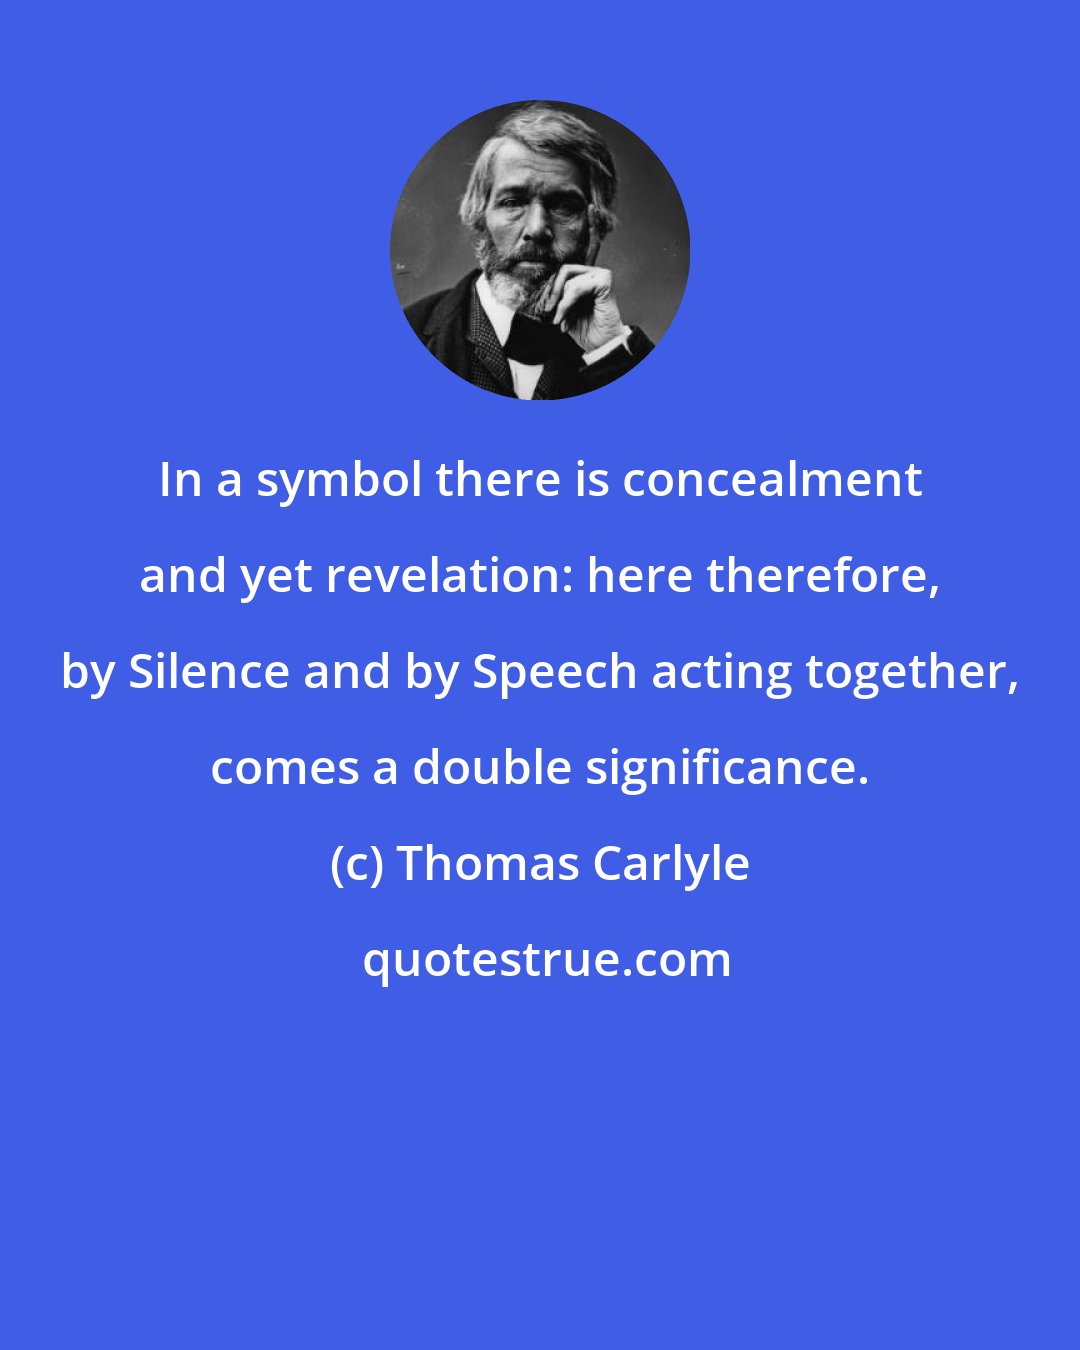 Thomas Carlyle: In a symbol there is concealment and yet revelation: here therefore, by Silence and by Speech acting together, comes a double significance.